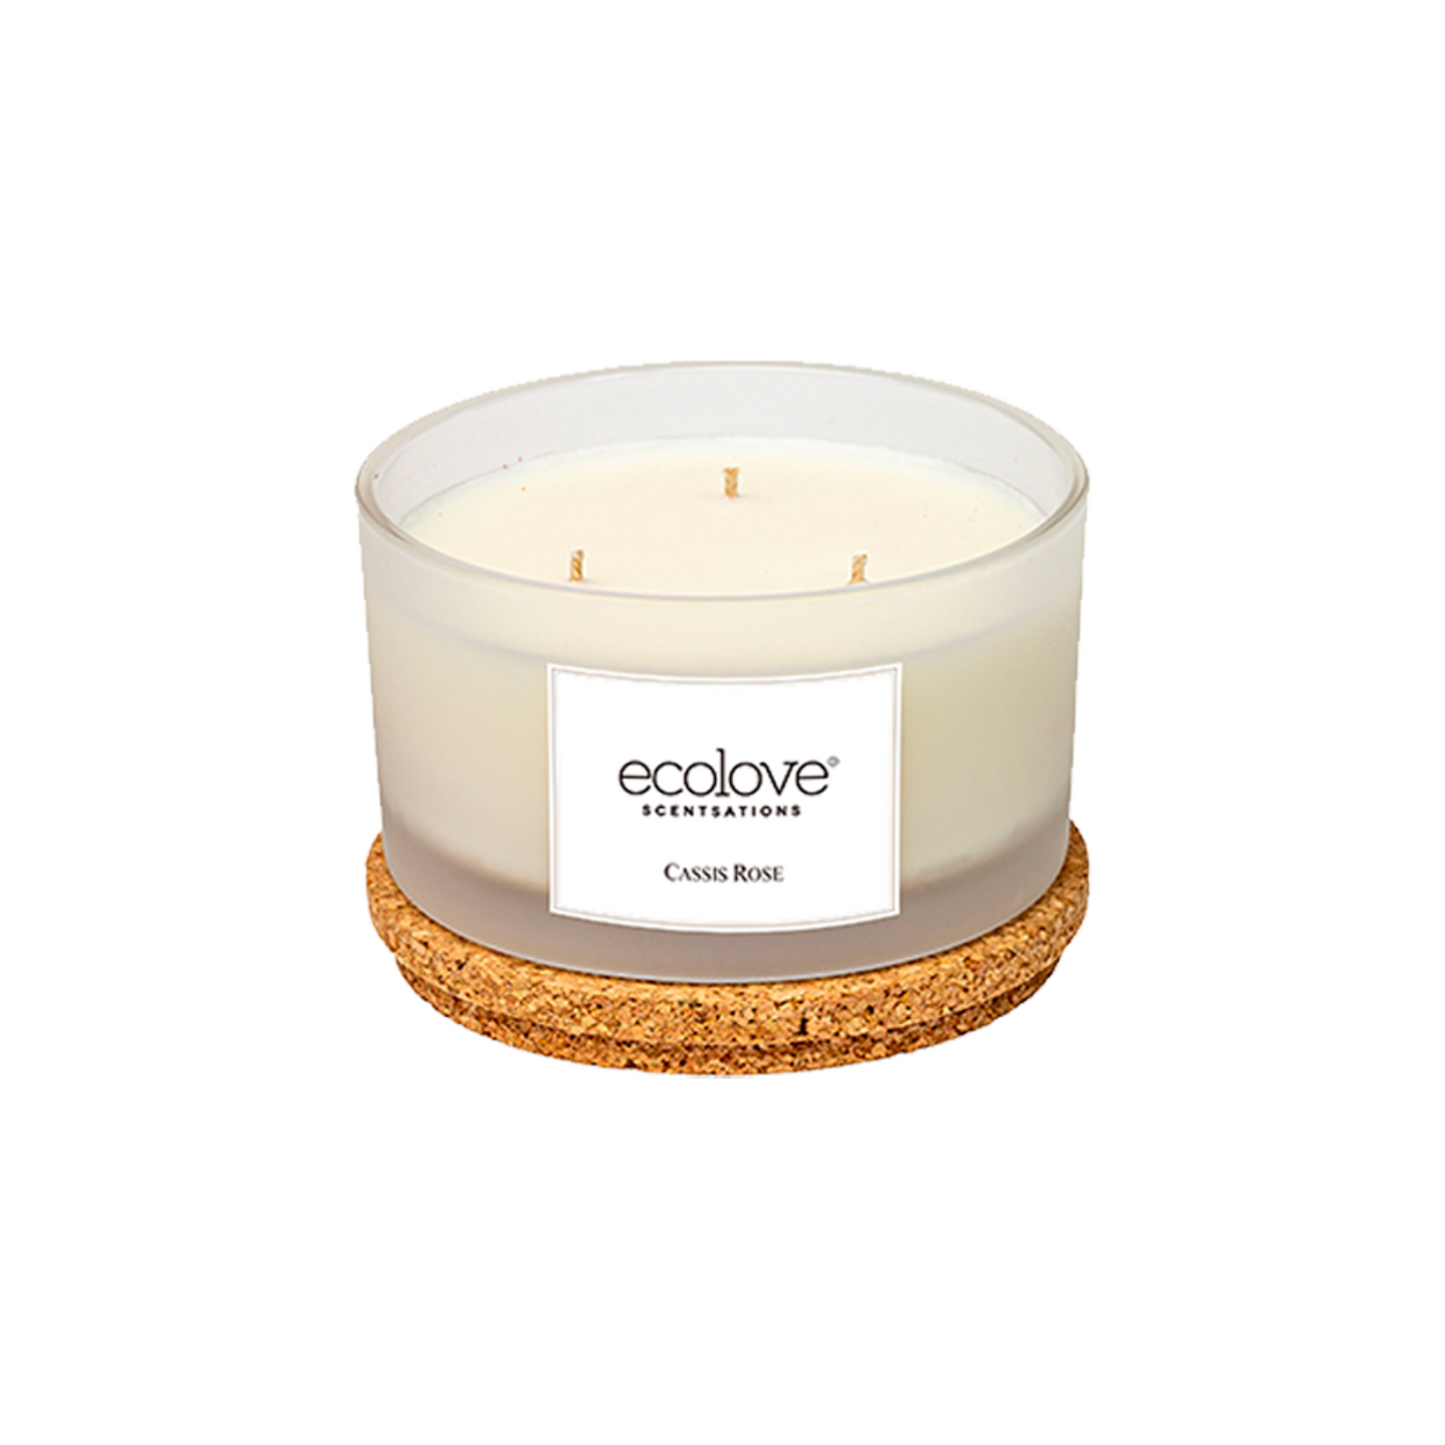 Ecolove 3-Wick Cassis Rose Candle